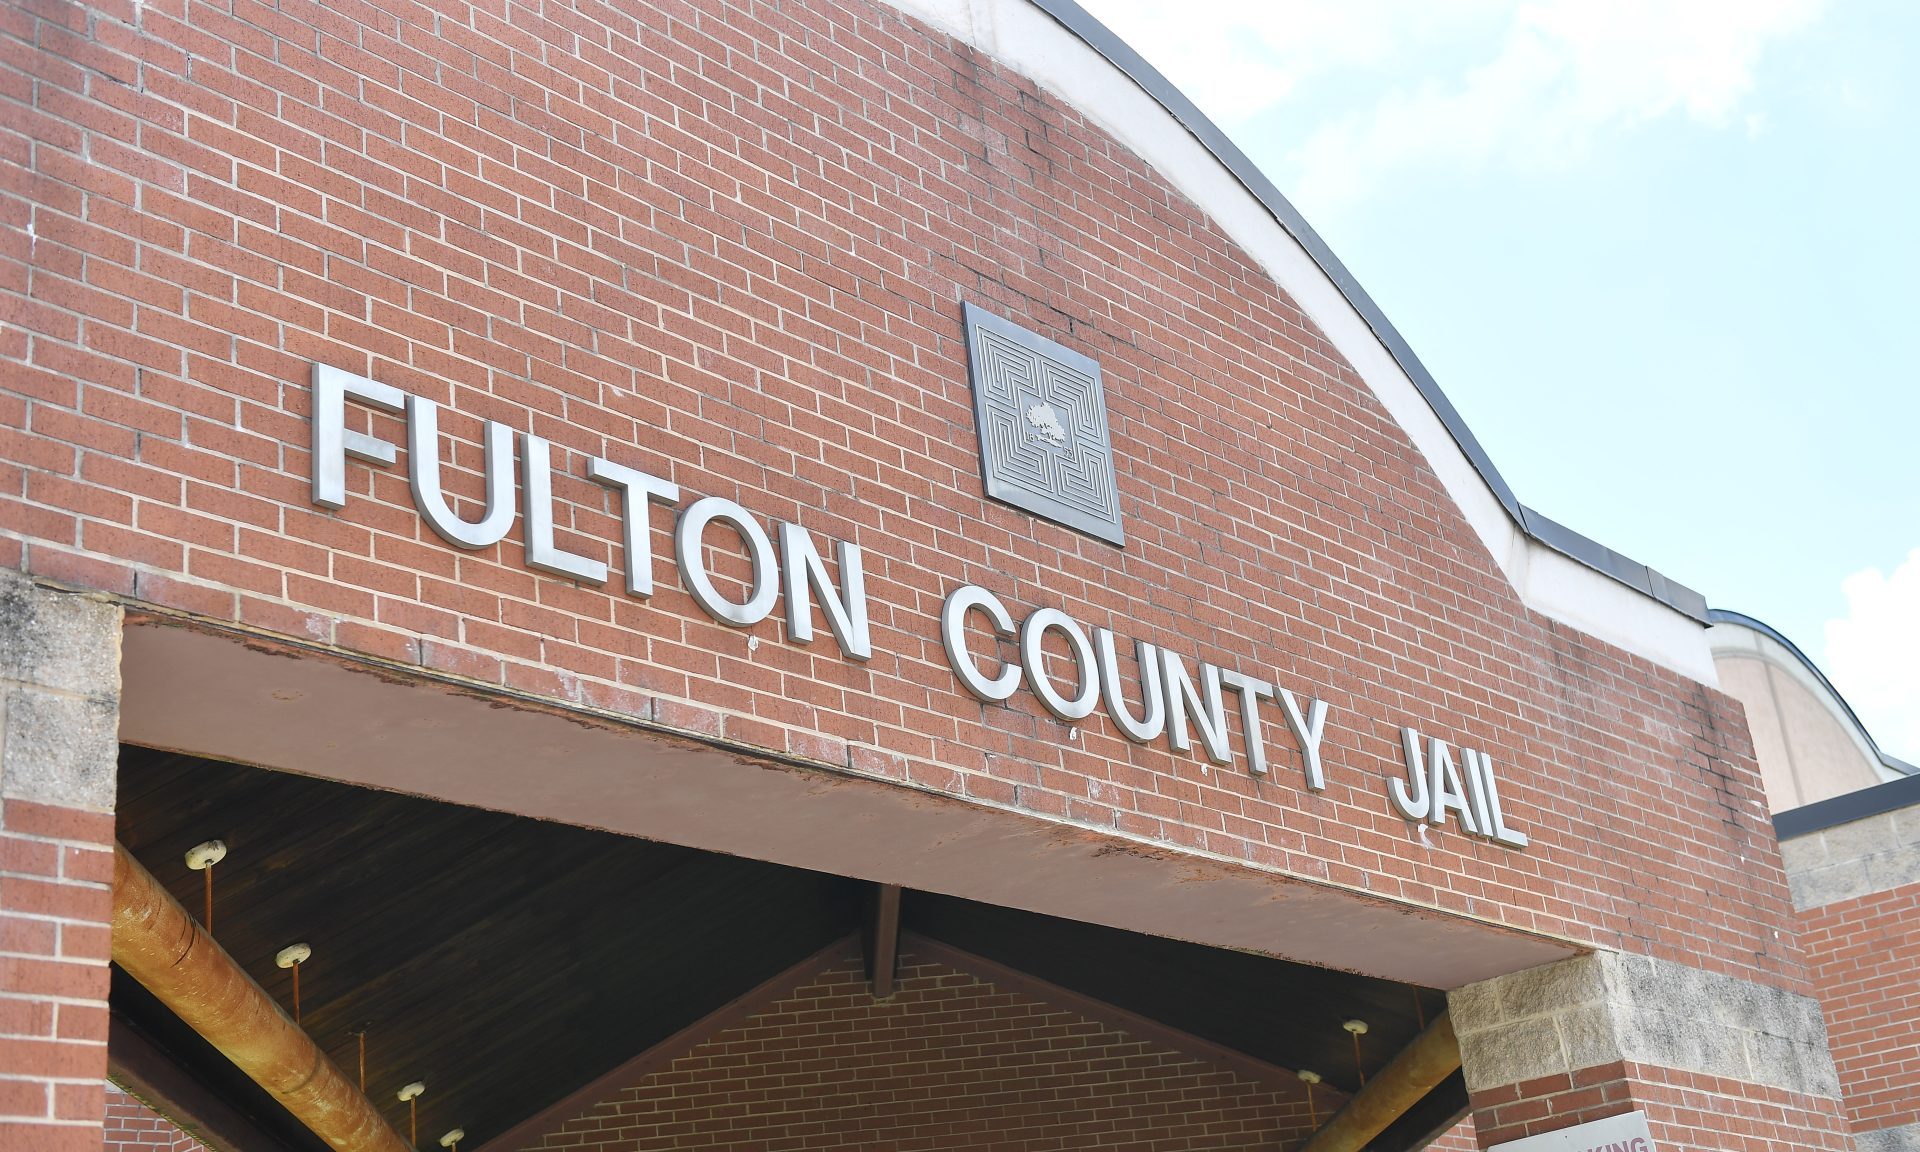 UPDATE: Family Of Man 'Eaten Alive By Insects And Bed Bugs' In Fulton County Jail Reaches $4M Settlement